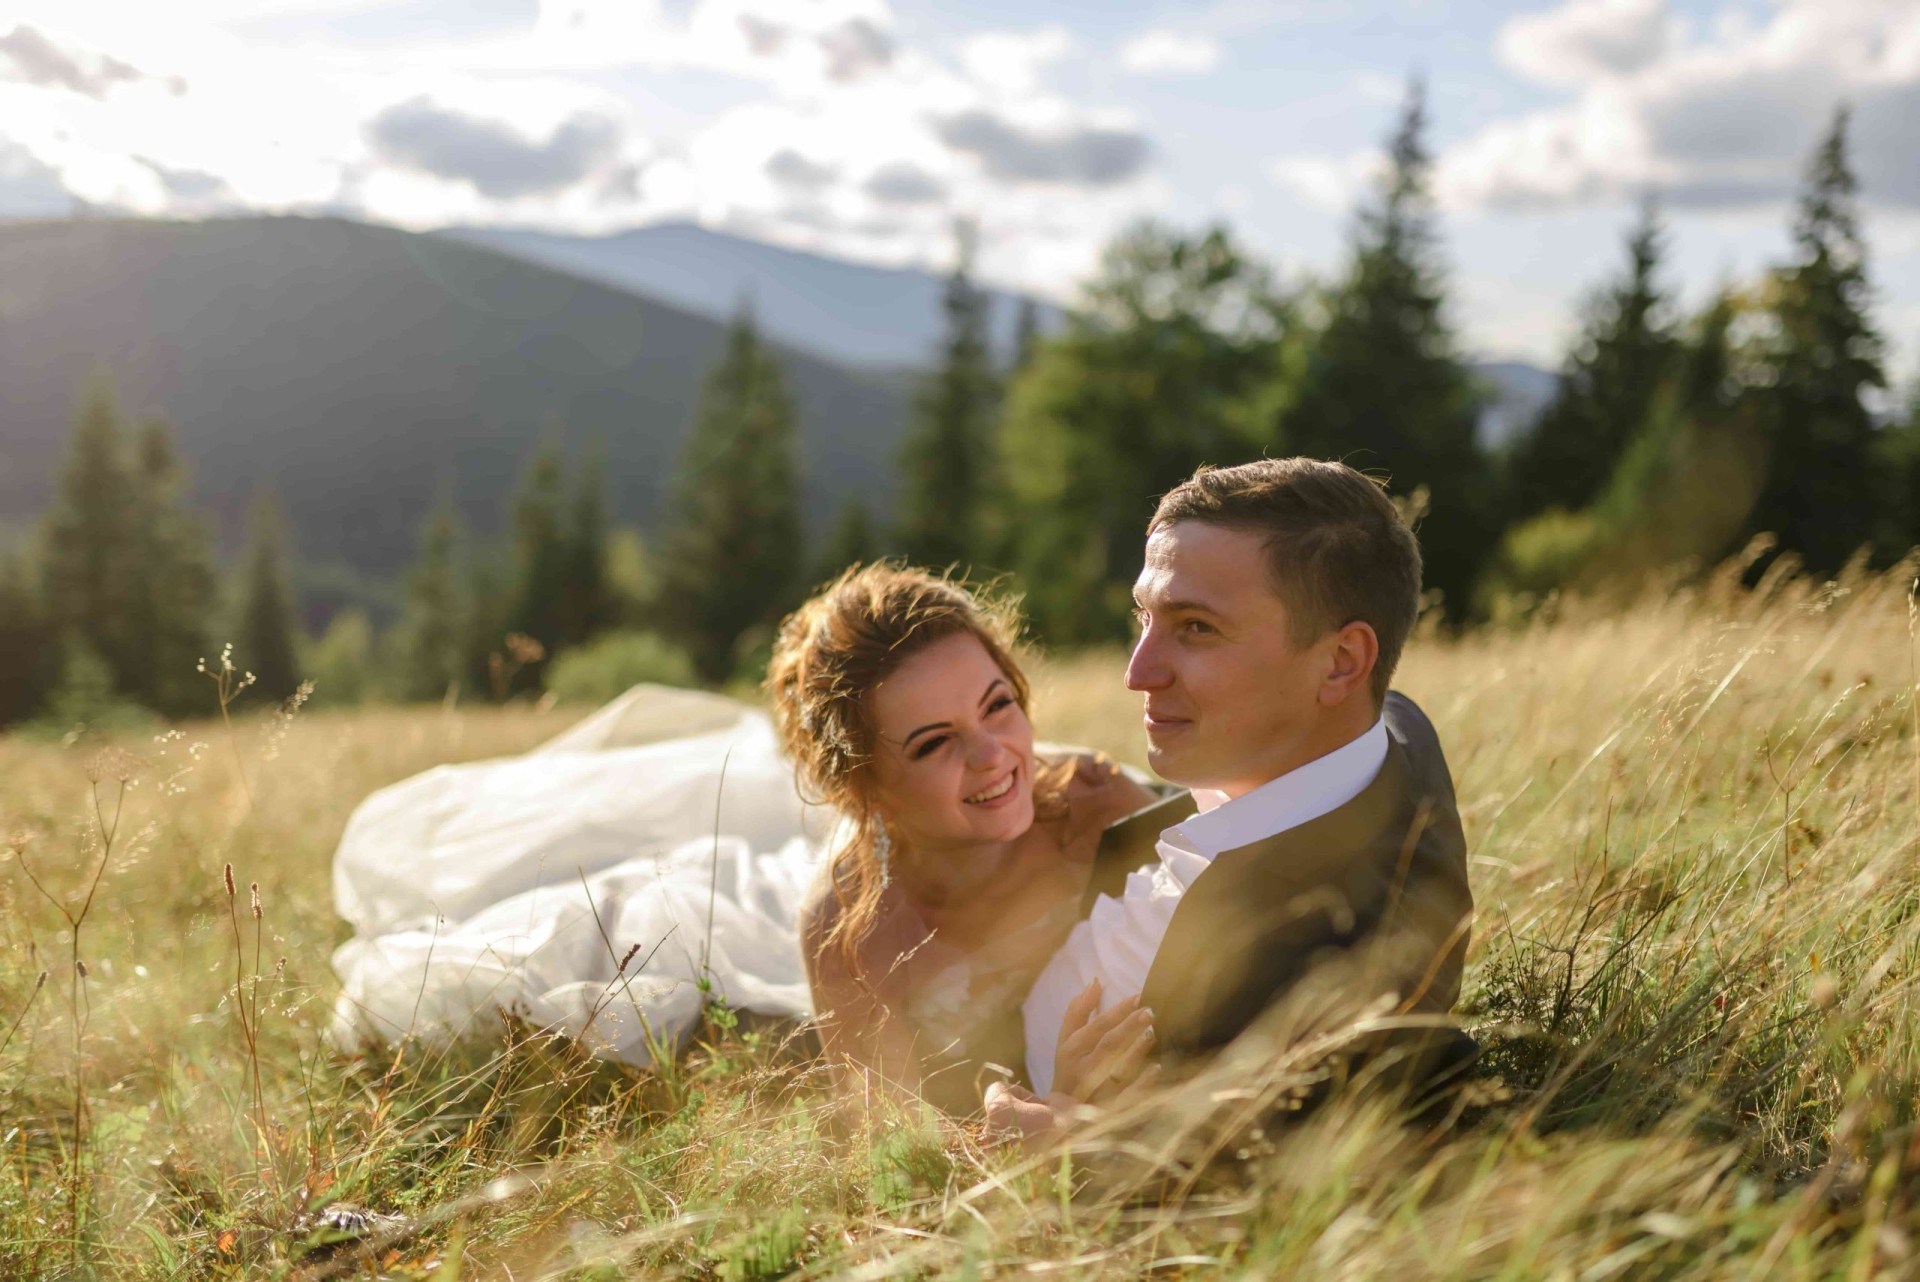 wedding photography in the mountains newlyweds ar 2021 09 02 01 29 45 utc min scaled